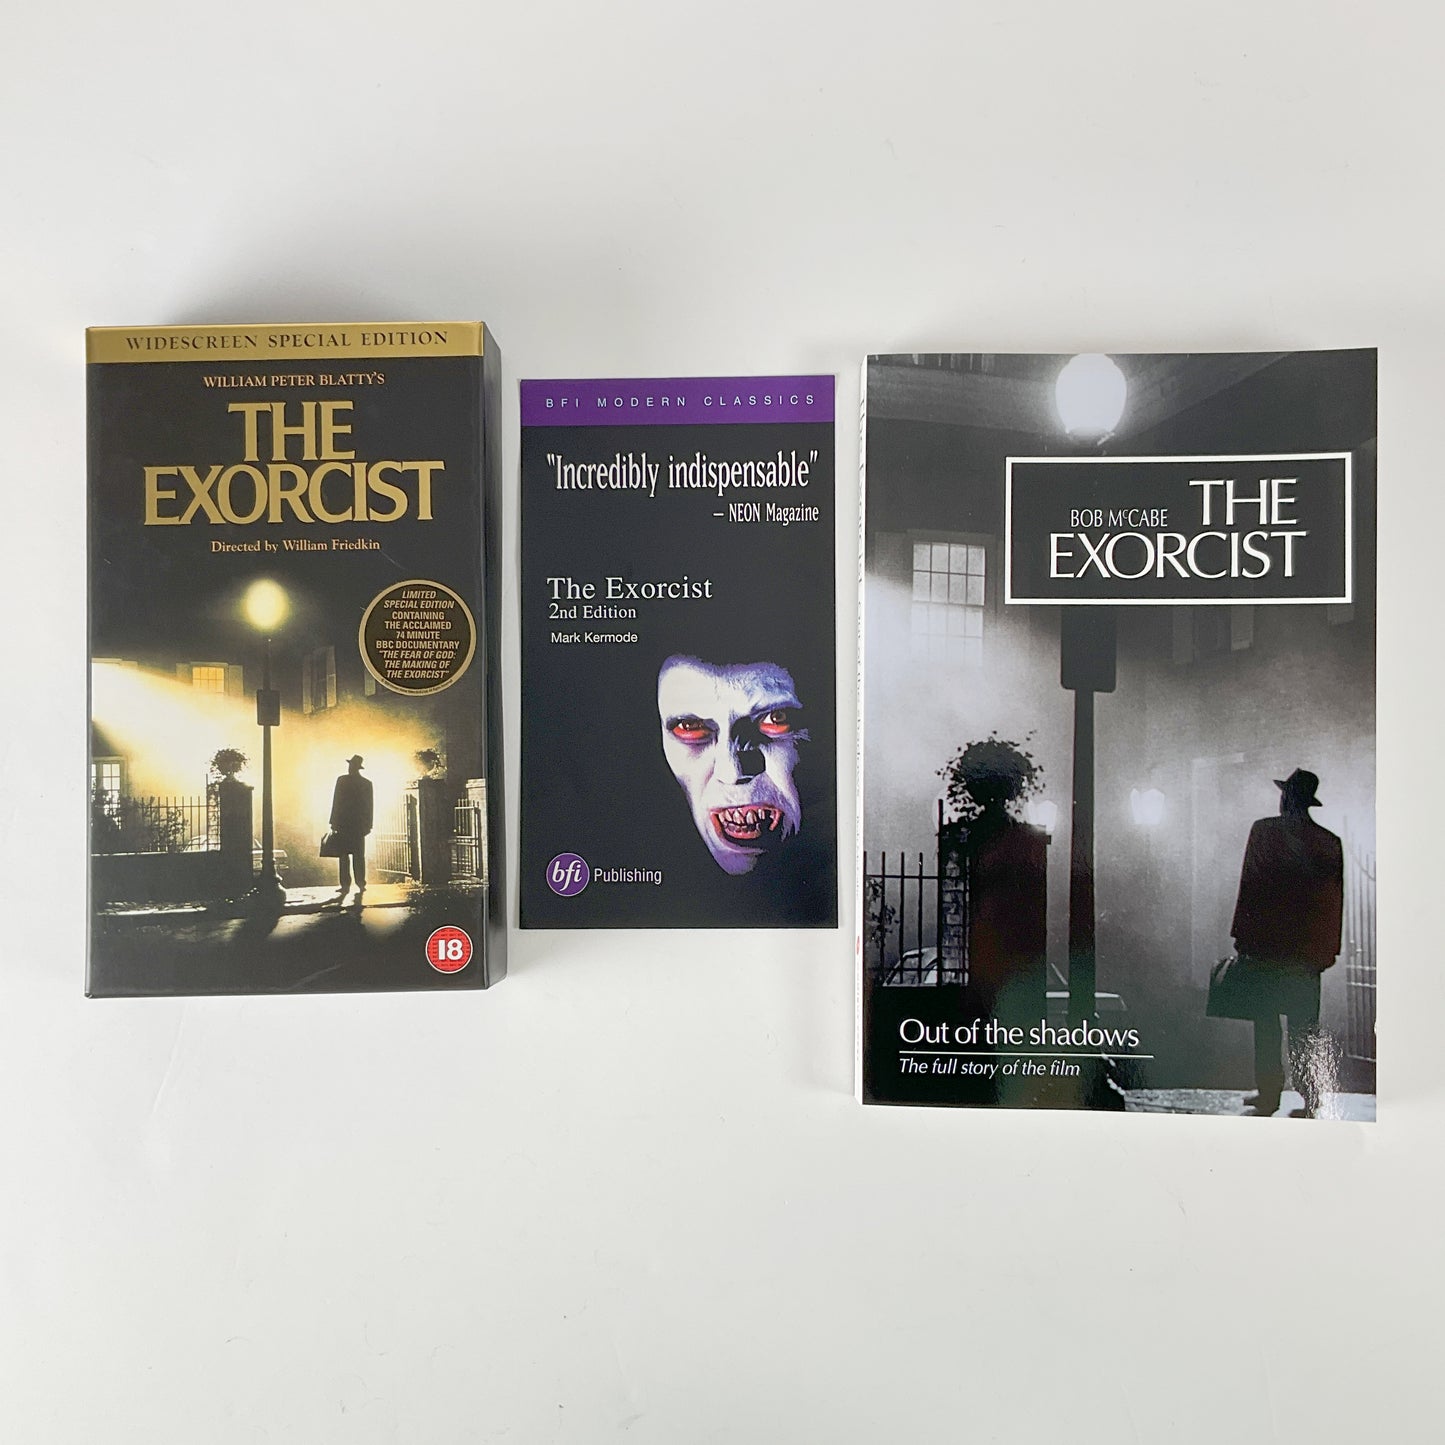 The Exorcist - Special Edition Widescreen Box Set VHS